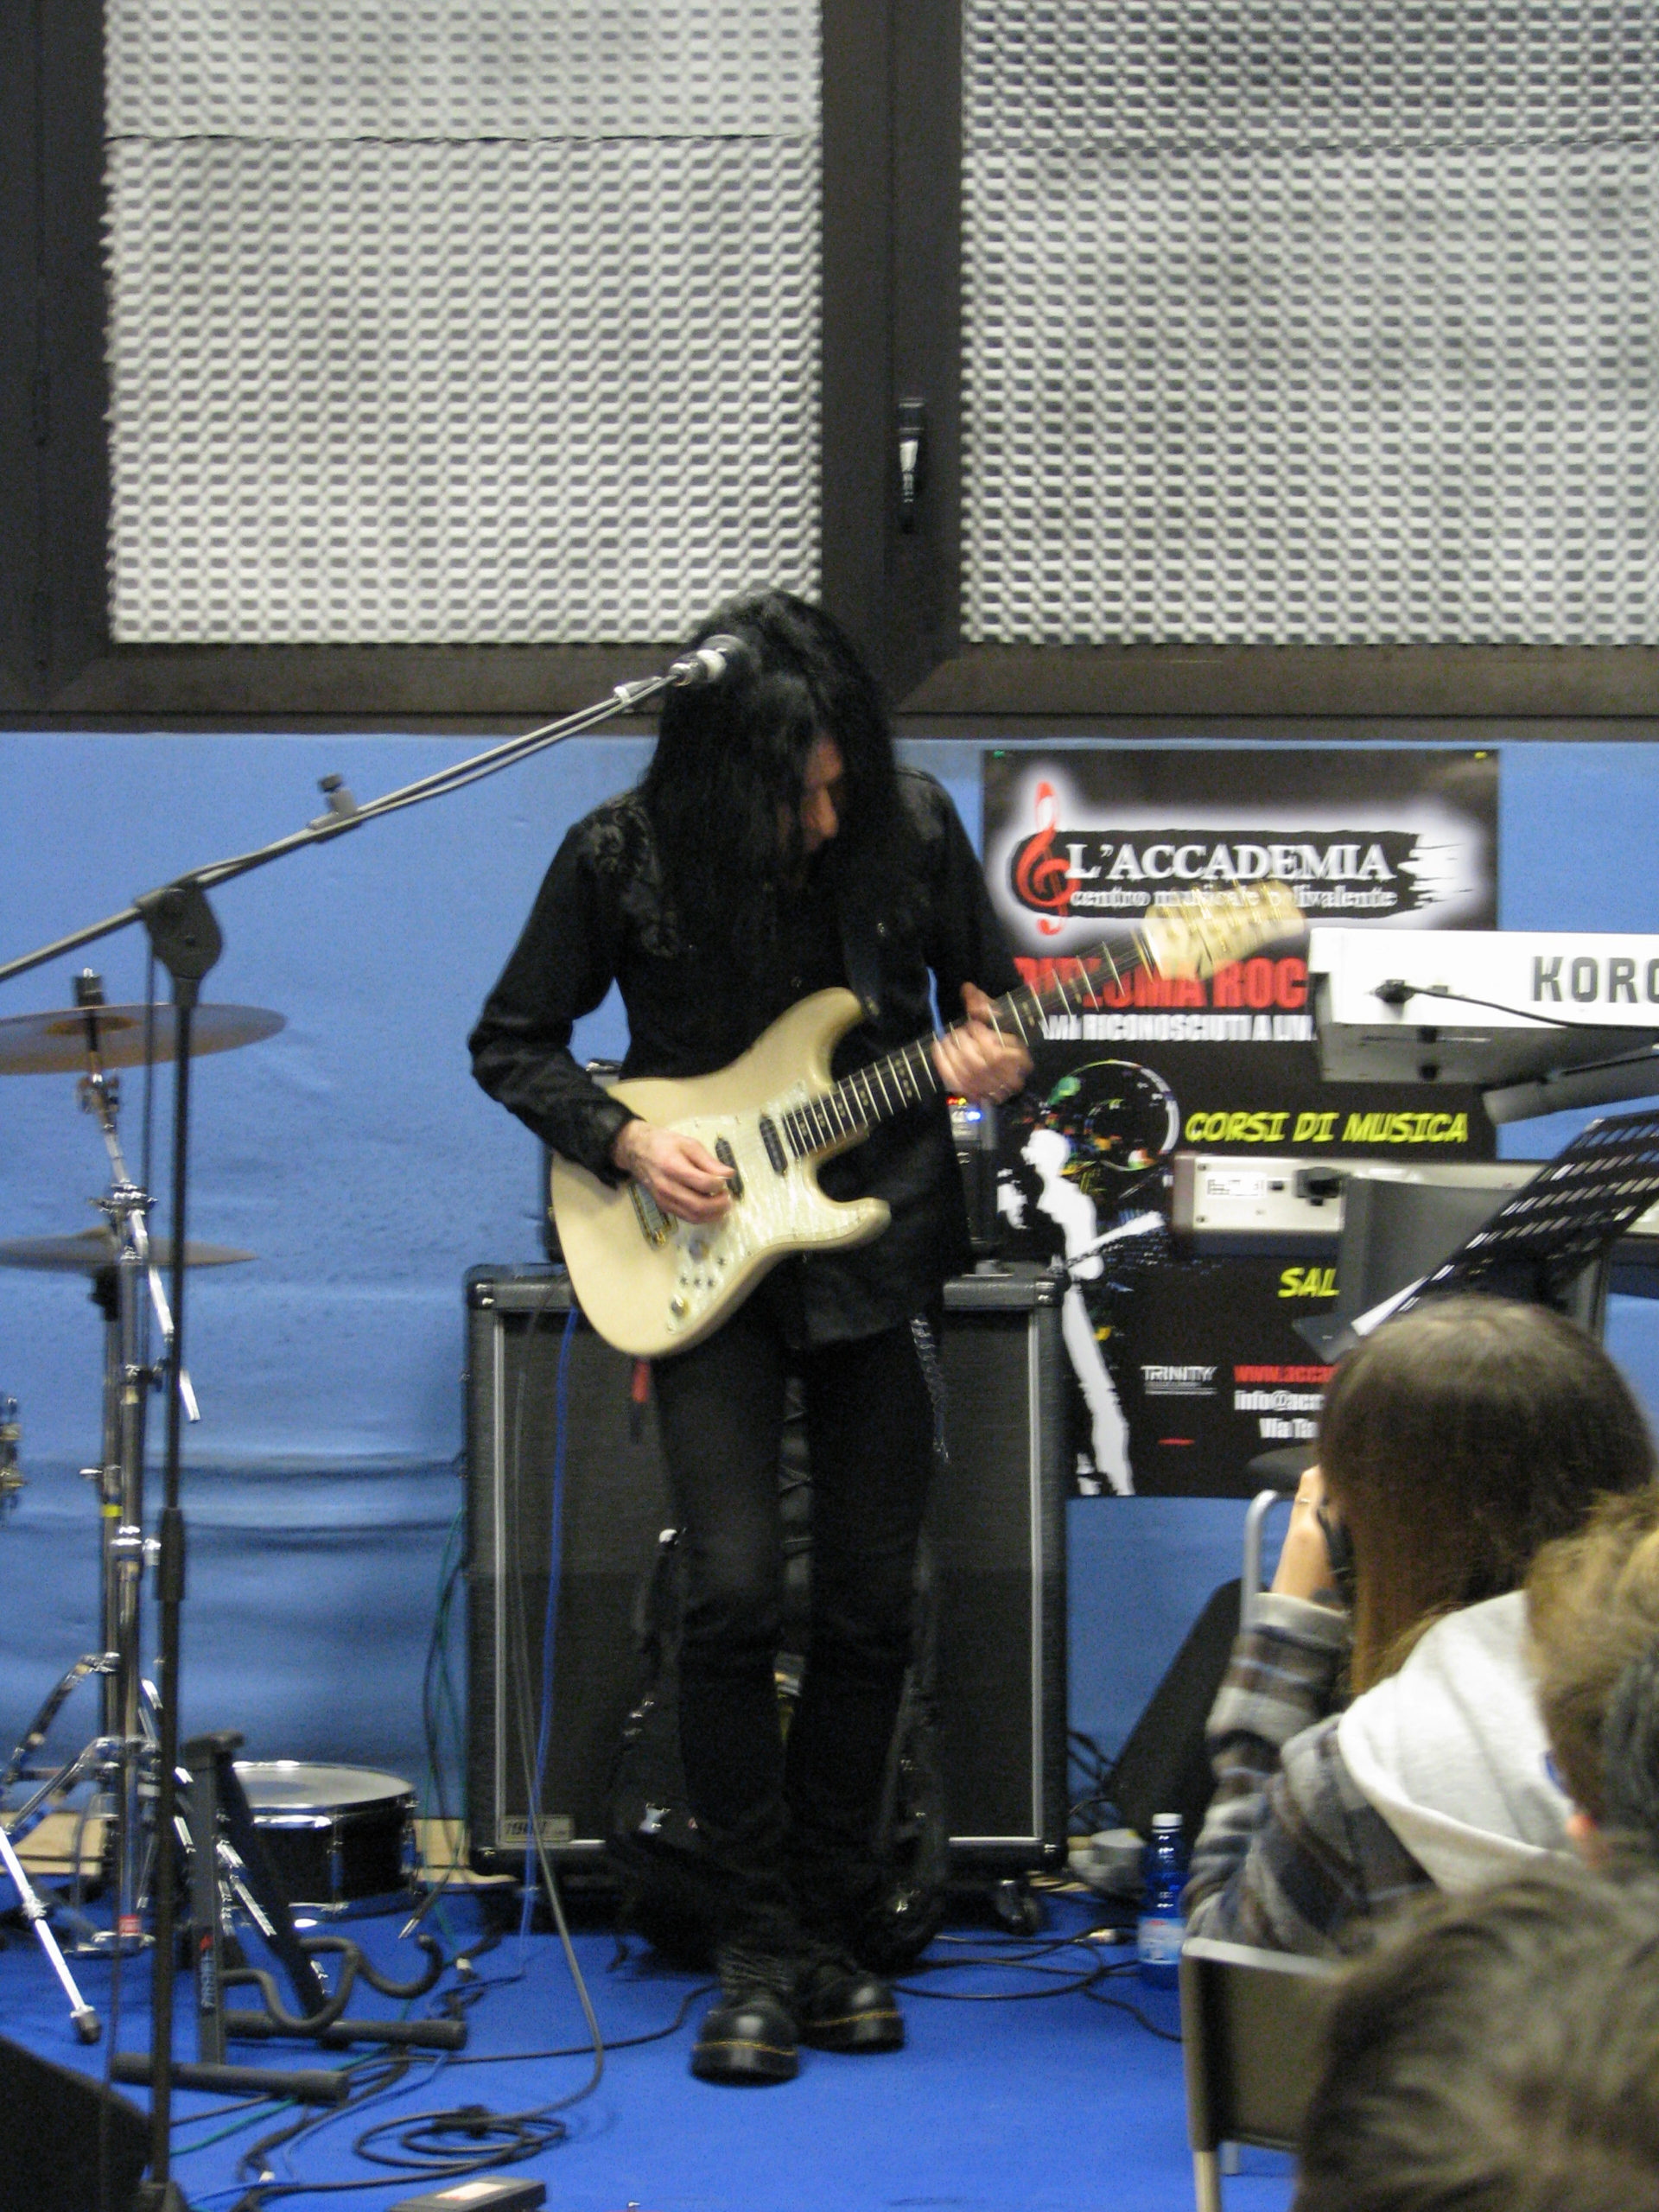 Mike Campese - Guitar Clinic in Parma, Italy. Pic 7.